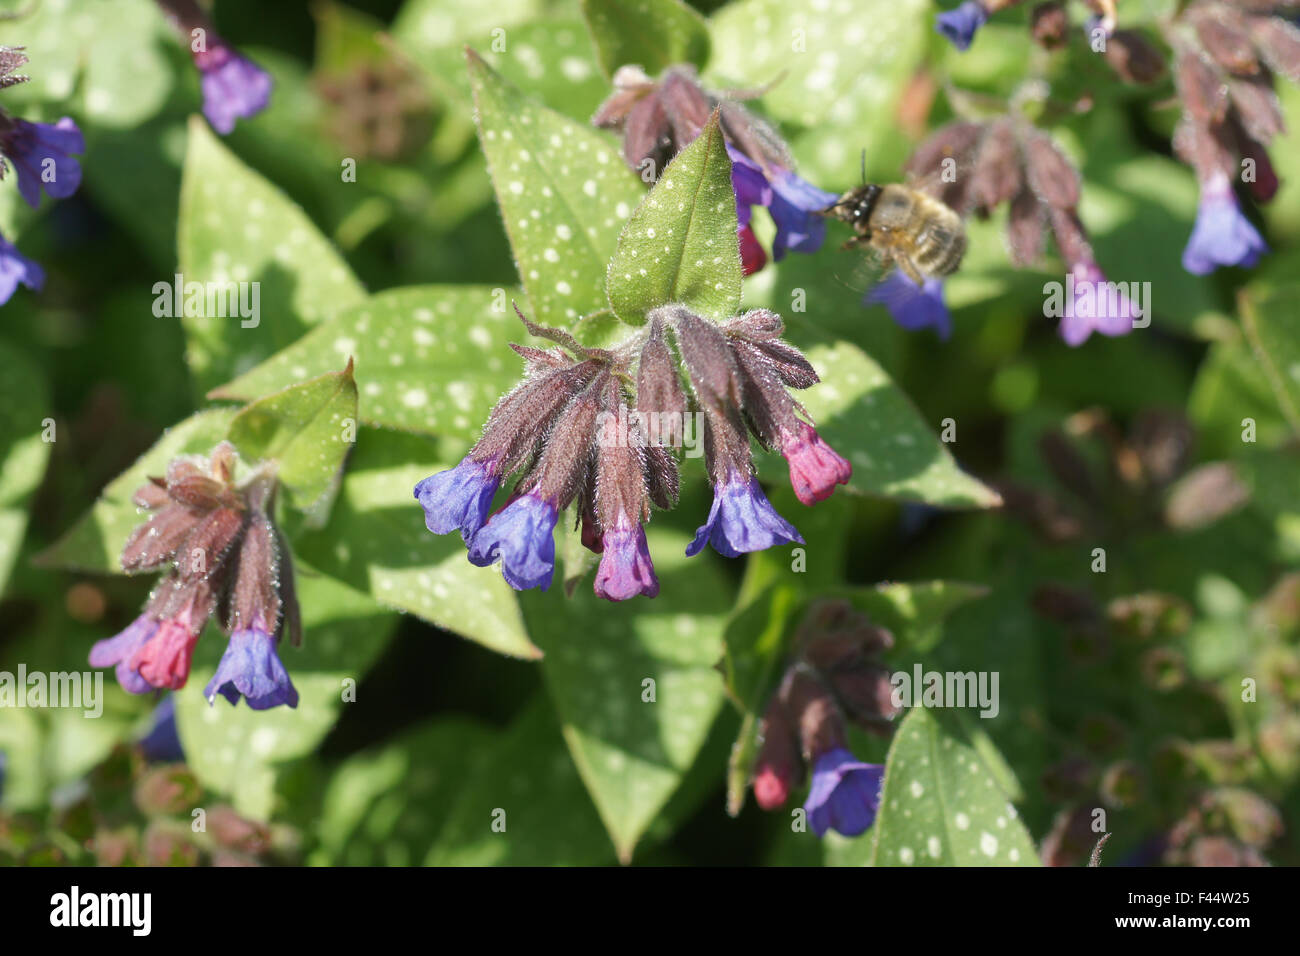 Longleaved lungwort Stock Photo